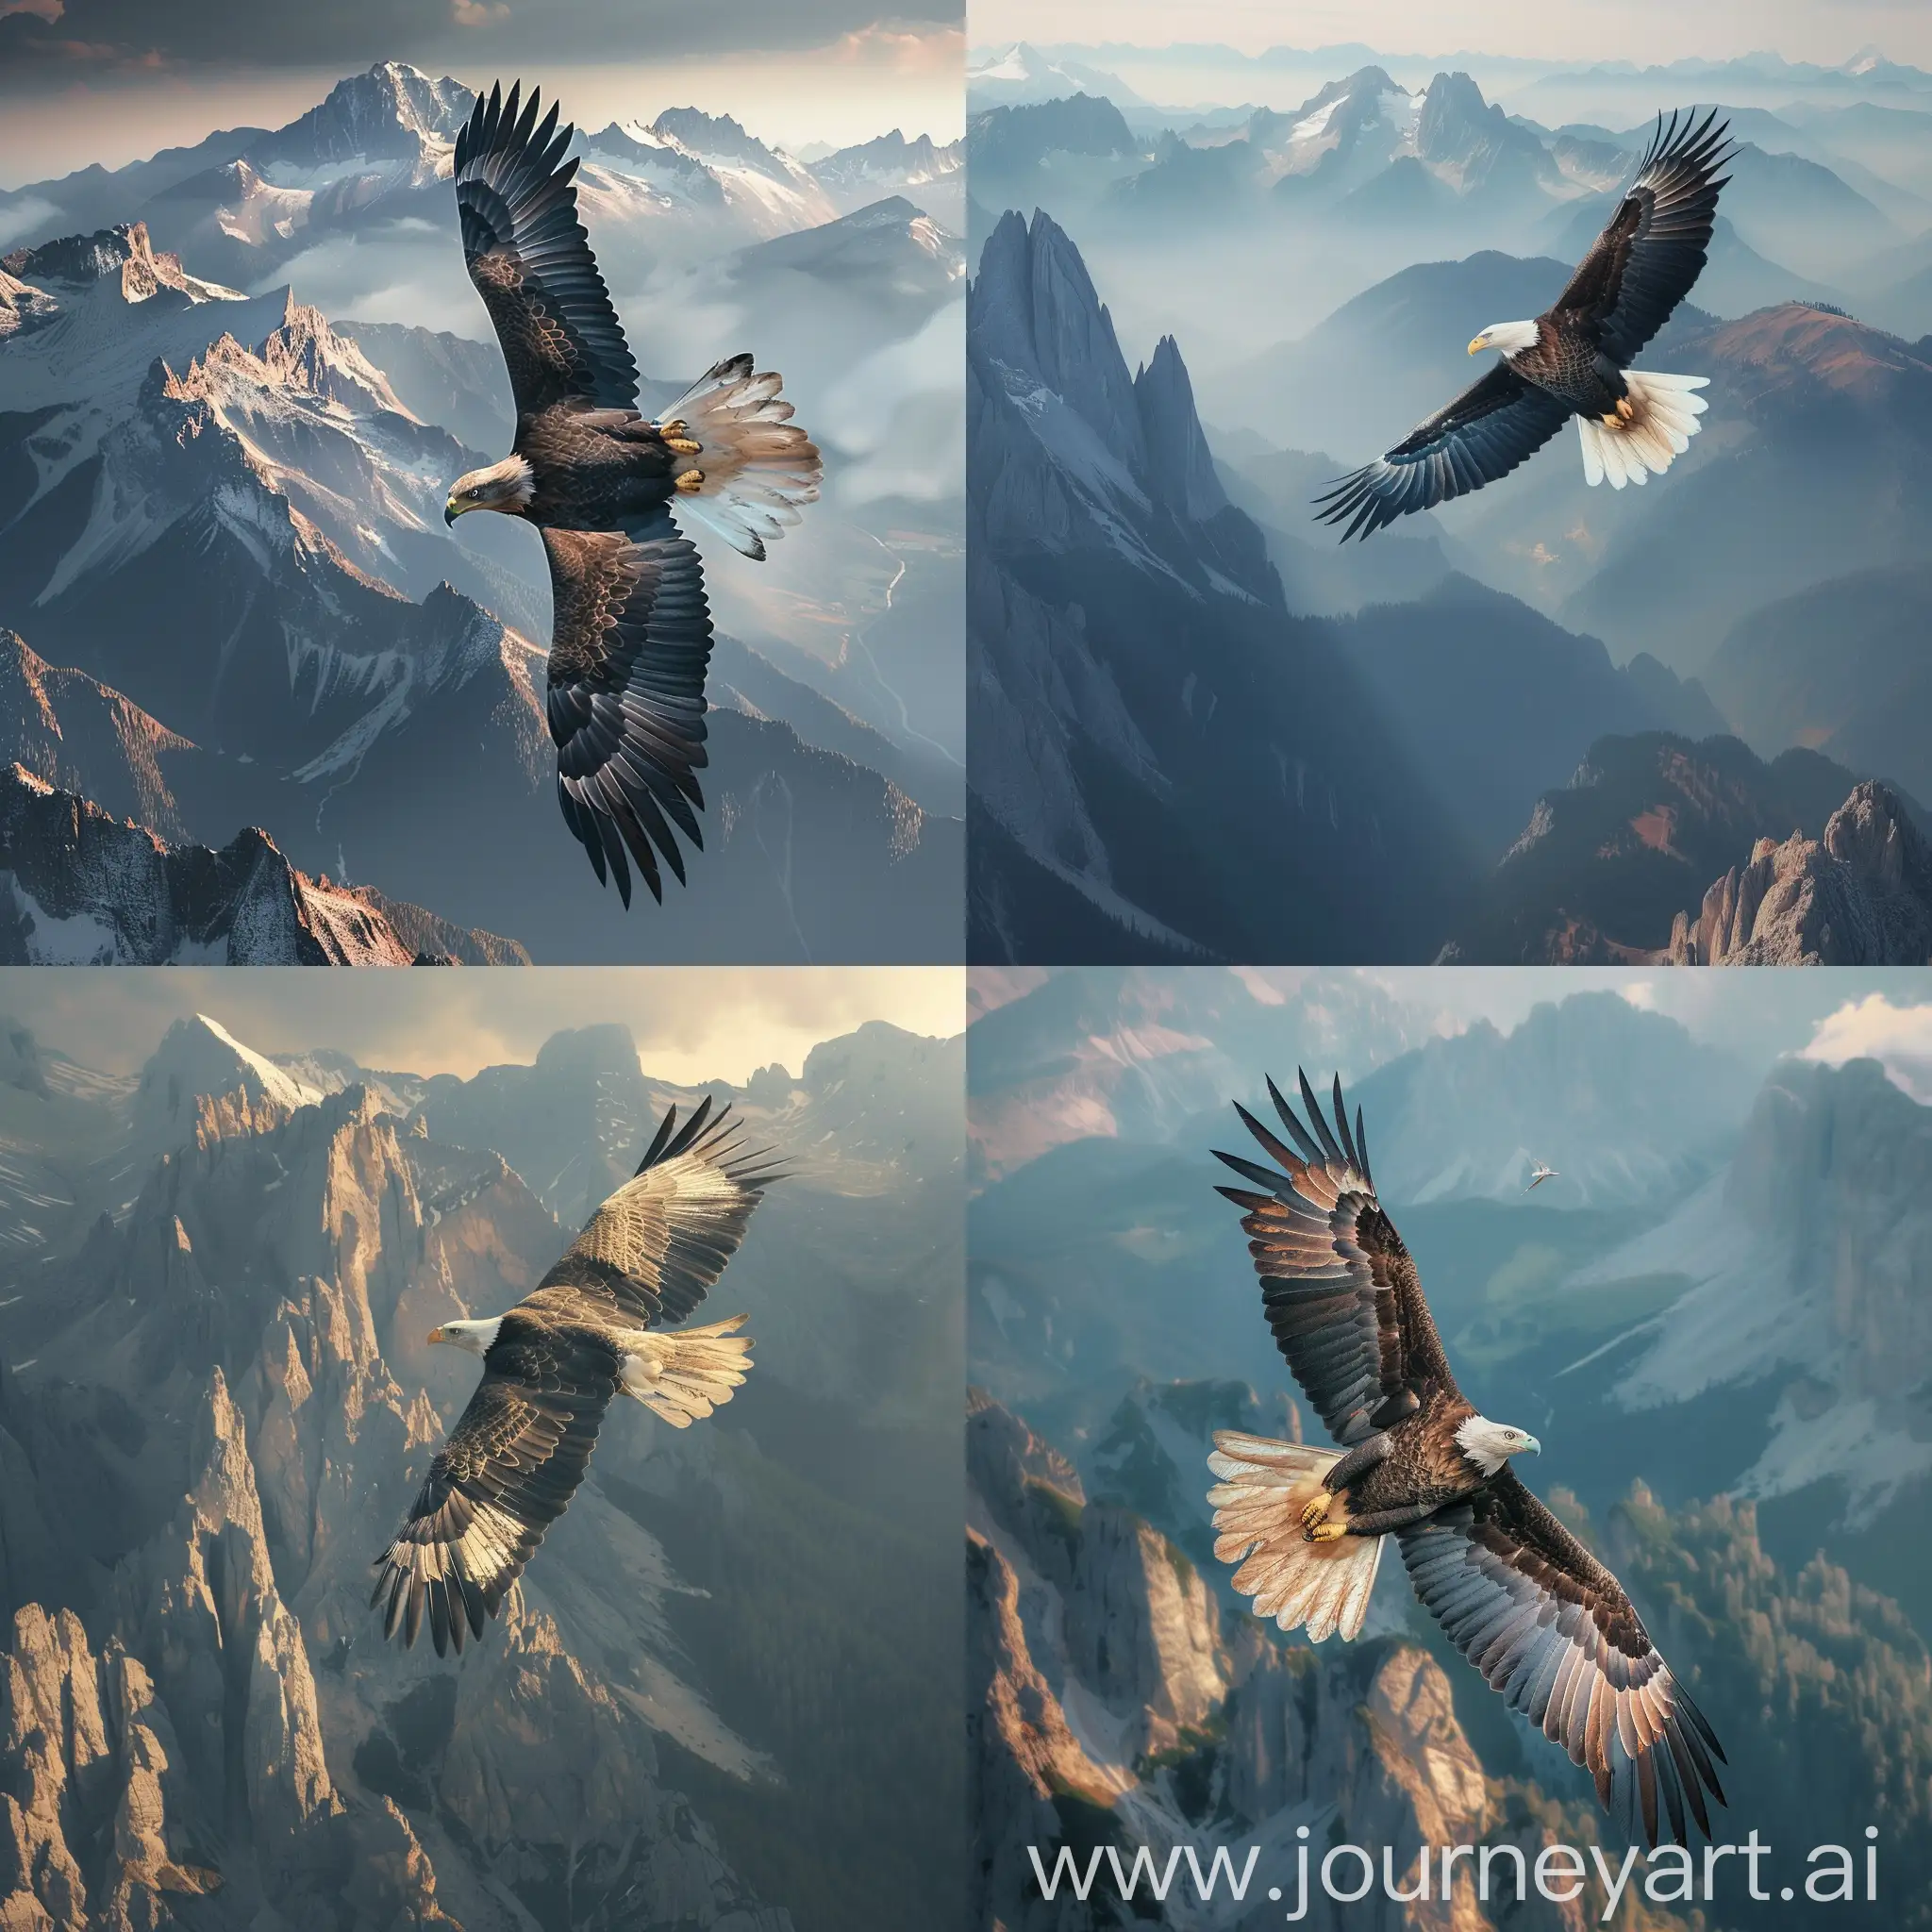 Generate an image that embodies the concept of personal growth and empowerment. The image should feature a soaring eagle against the backdrop of a majestic mountain range, symbolizing ambition, determination, and the journey towards success. The eagle should radiate strength and confidence, while the mountains should evoke a sense of resilience and perseverance. The overall composition should inspire feelings of motivation, self-assurance, and the belief in one's ability to overcome obstacles and achieve greatness.